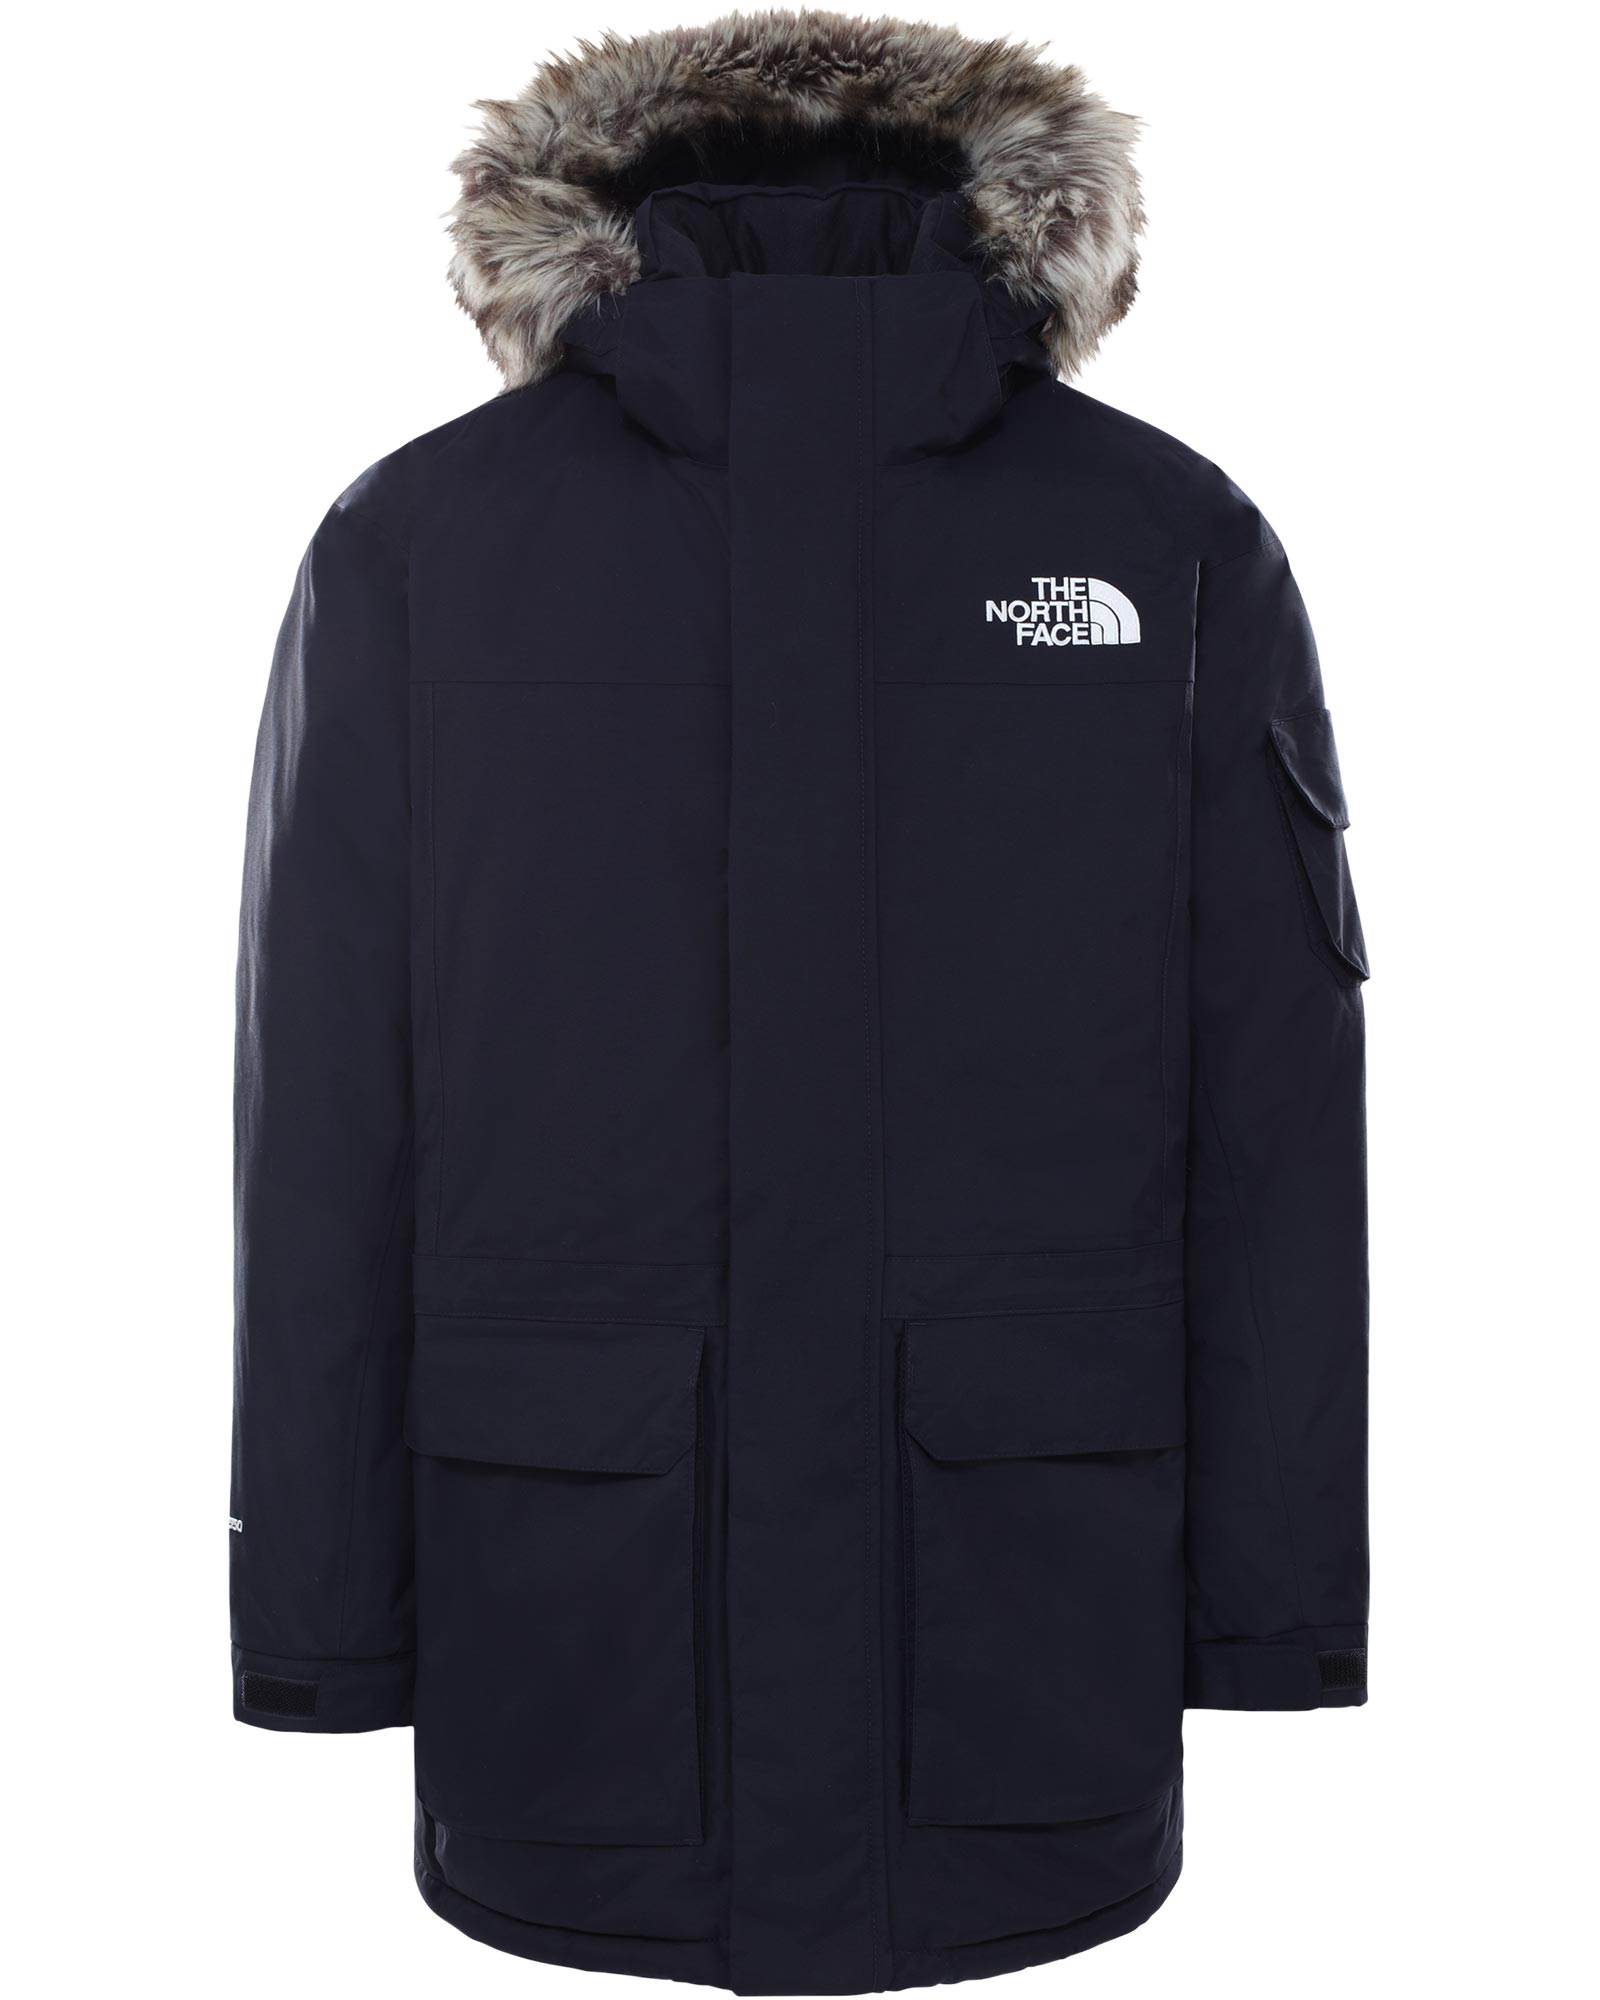 The North Face McMurdo Men's Jacket 0